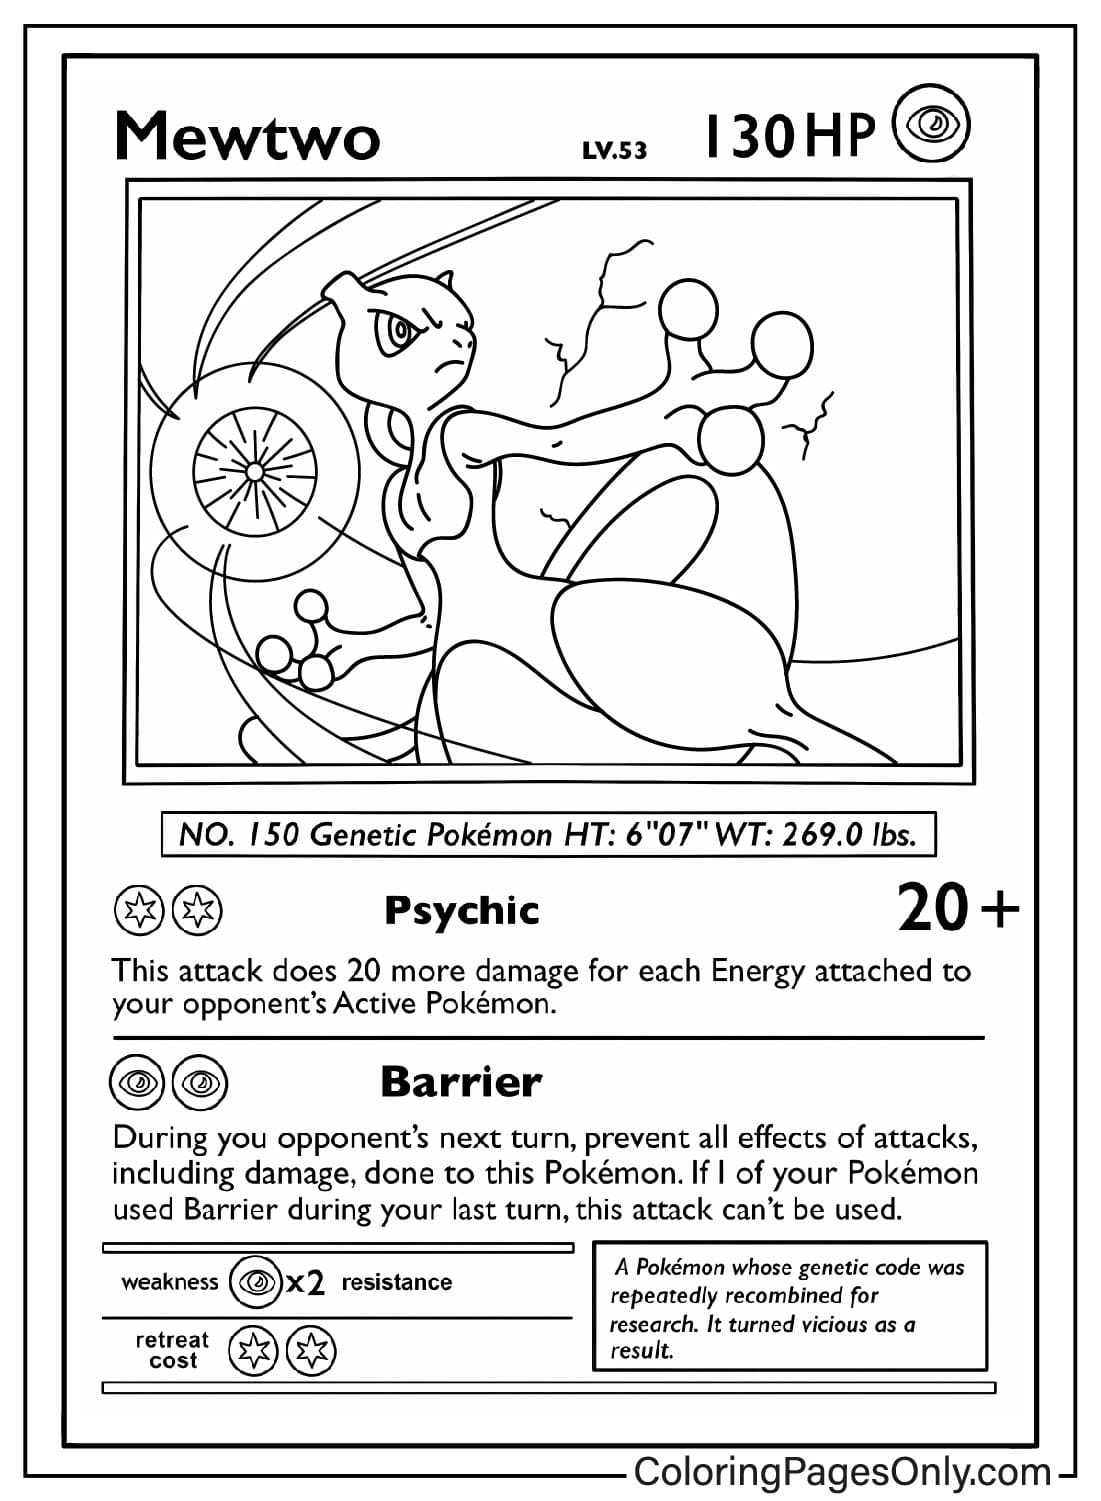 Mewtwo Pokemon Card Images to Color from Pokemon Card